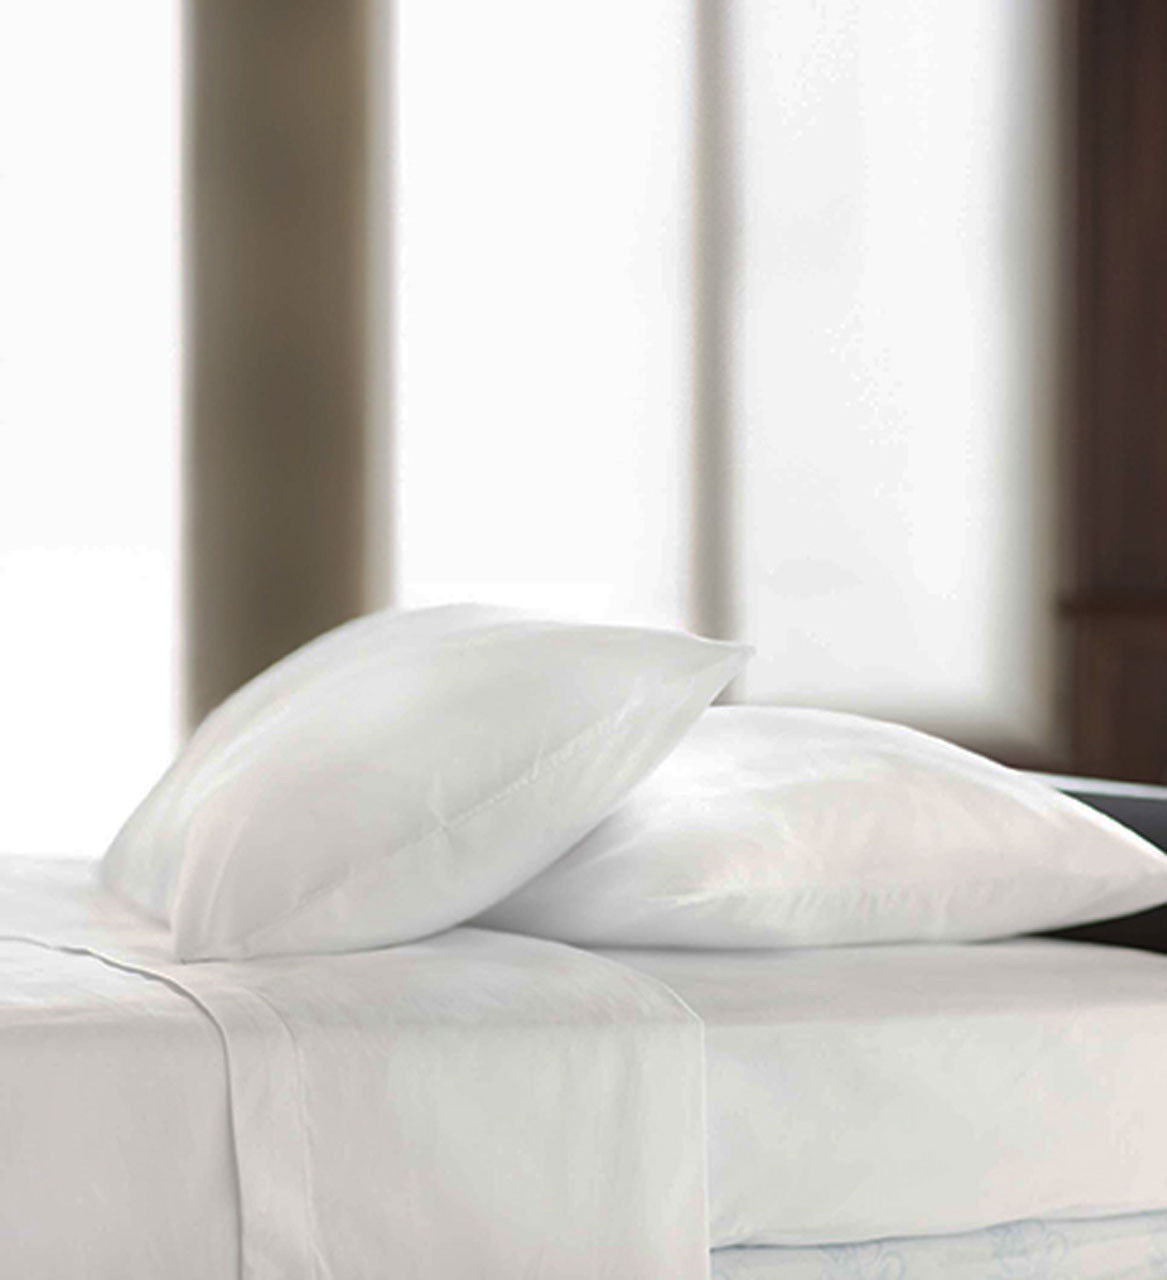 What makes Centium Satin Sheets the perfect choice?